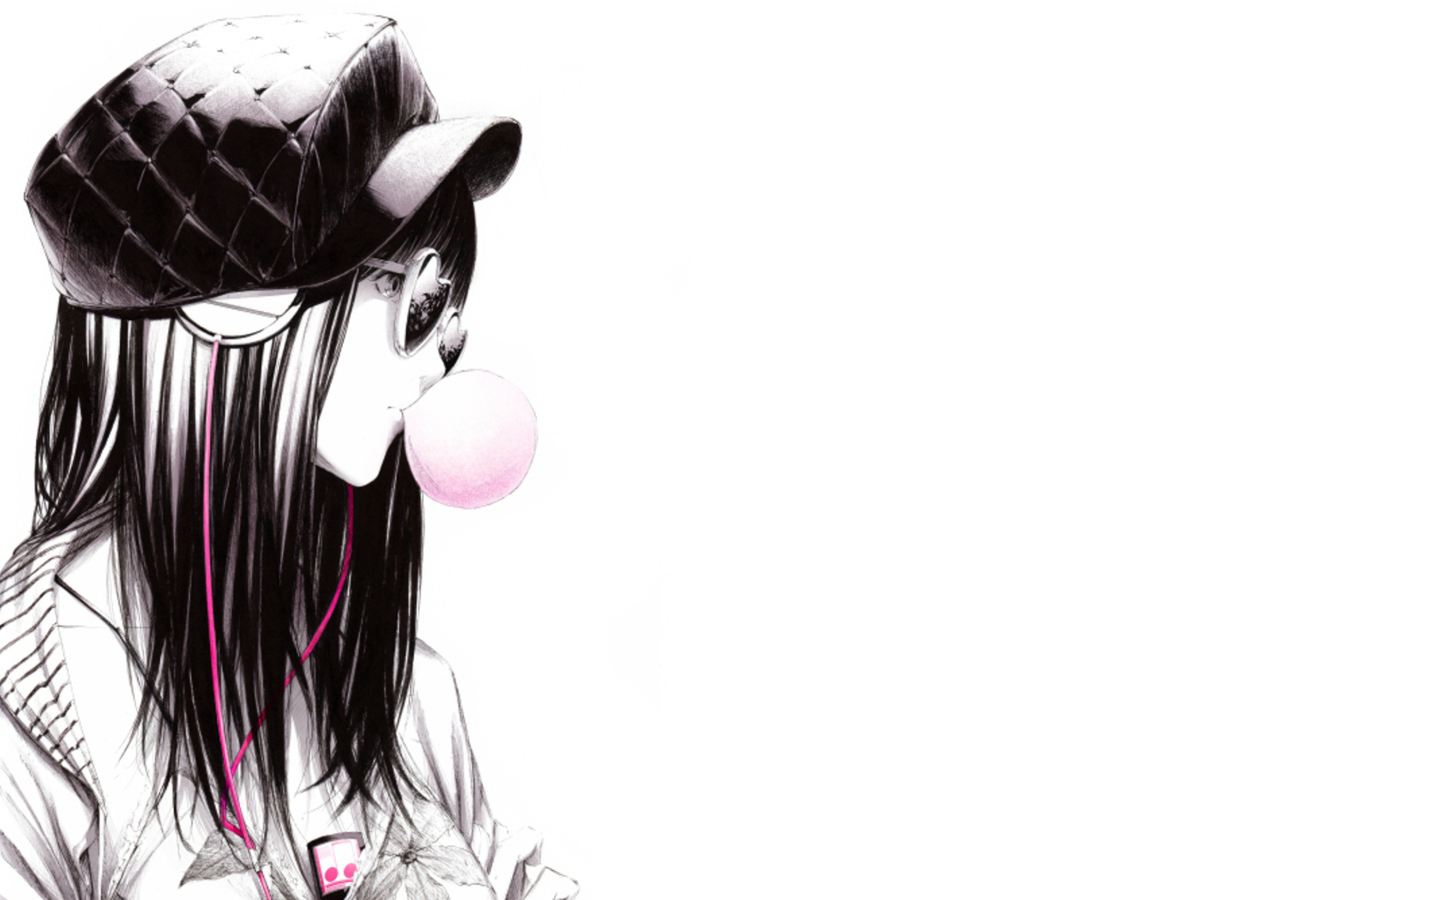 Scatch Of Girl In With Headphones And Gum wallpaper 1440x900